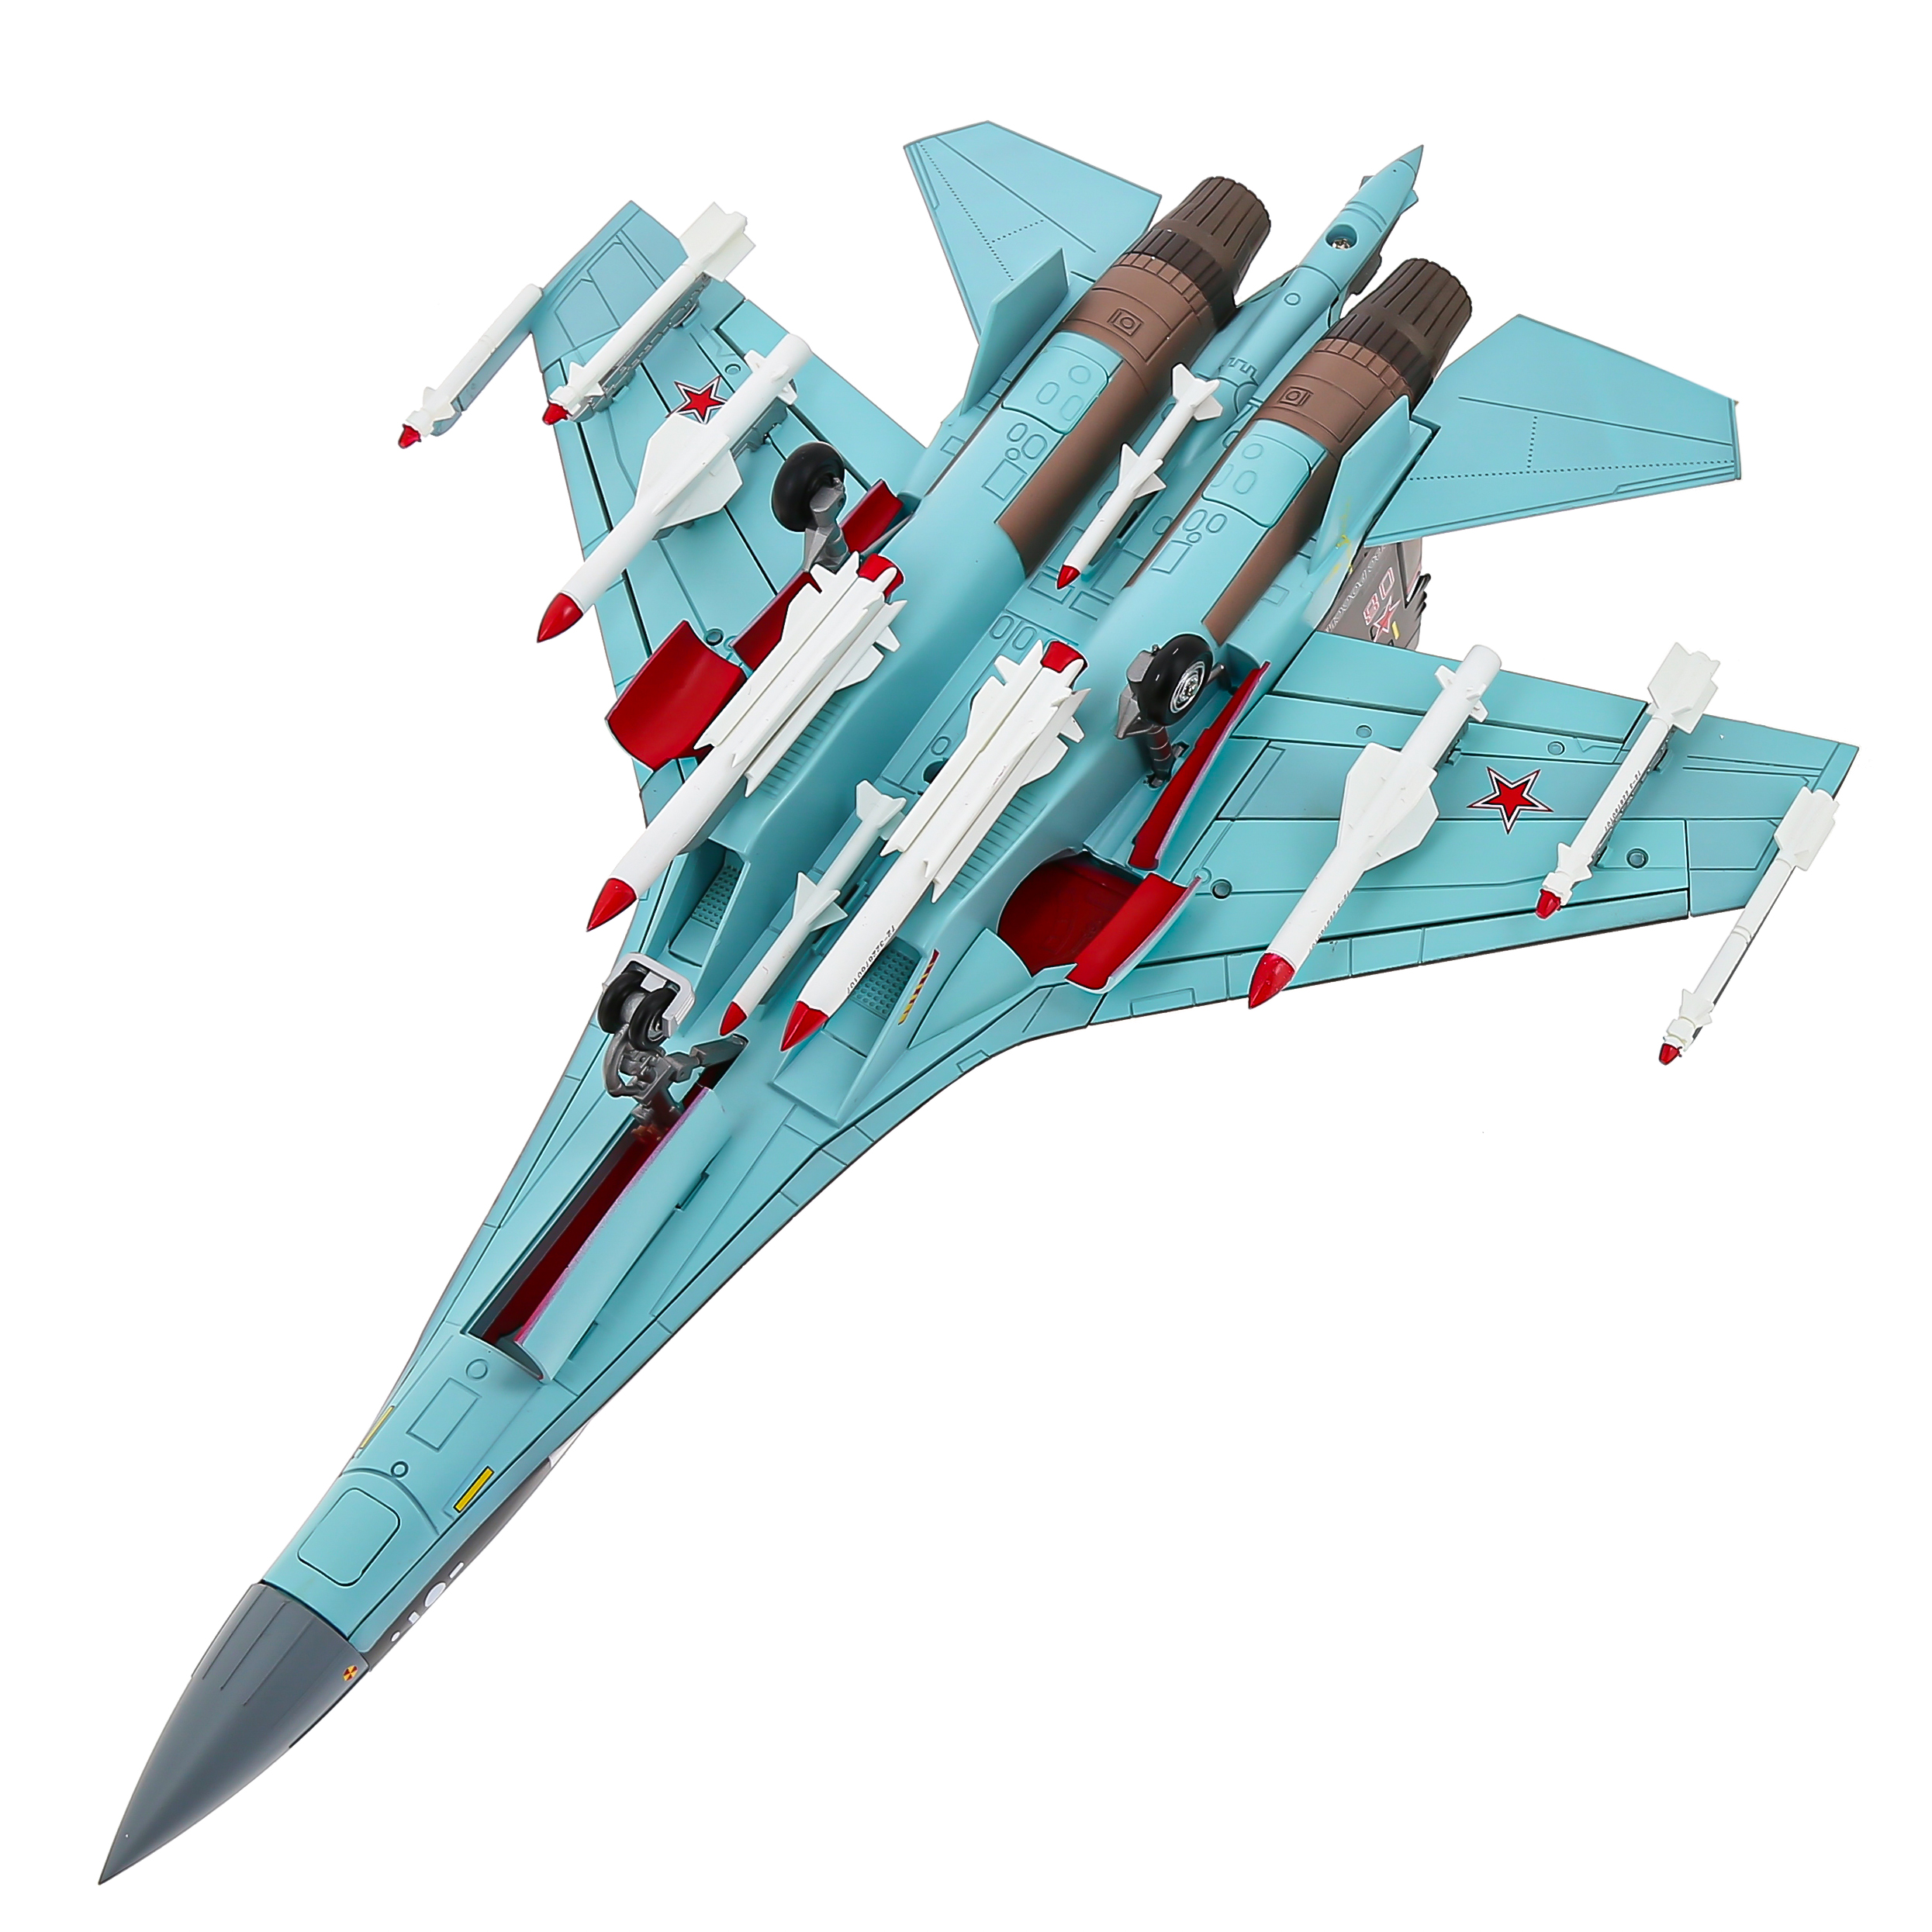       -35 ,  1:48.  47 . Large metal model of a Russian Su-35 fighter airplane, scale 1:48. Length 47 cm. # 6 hobbyplus.ru